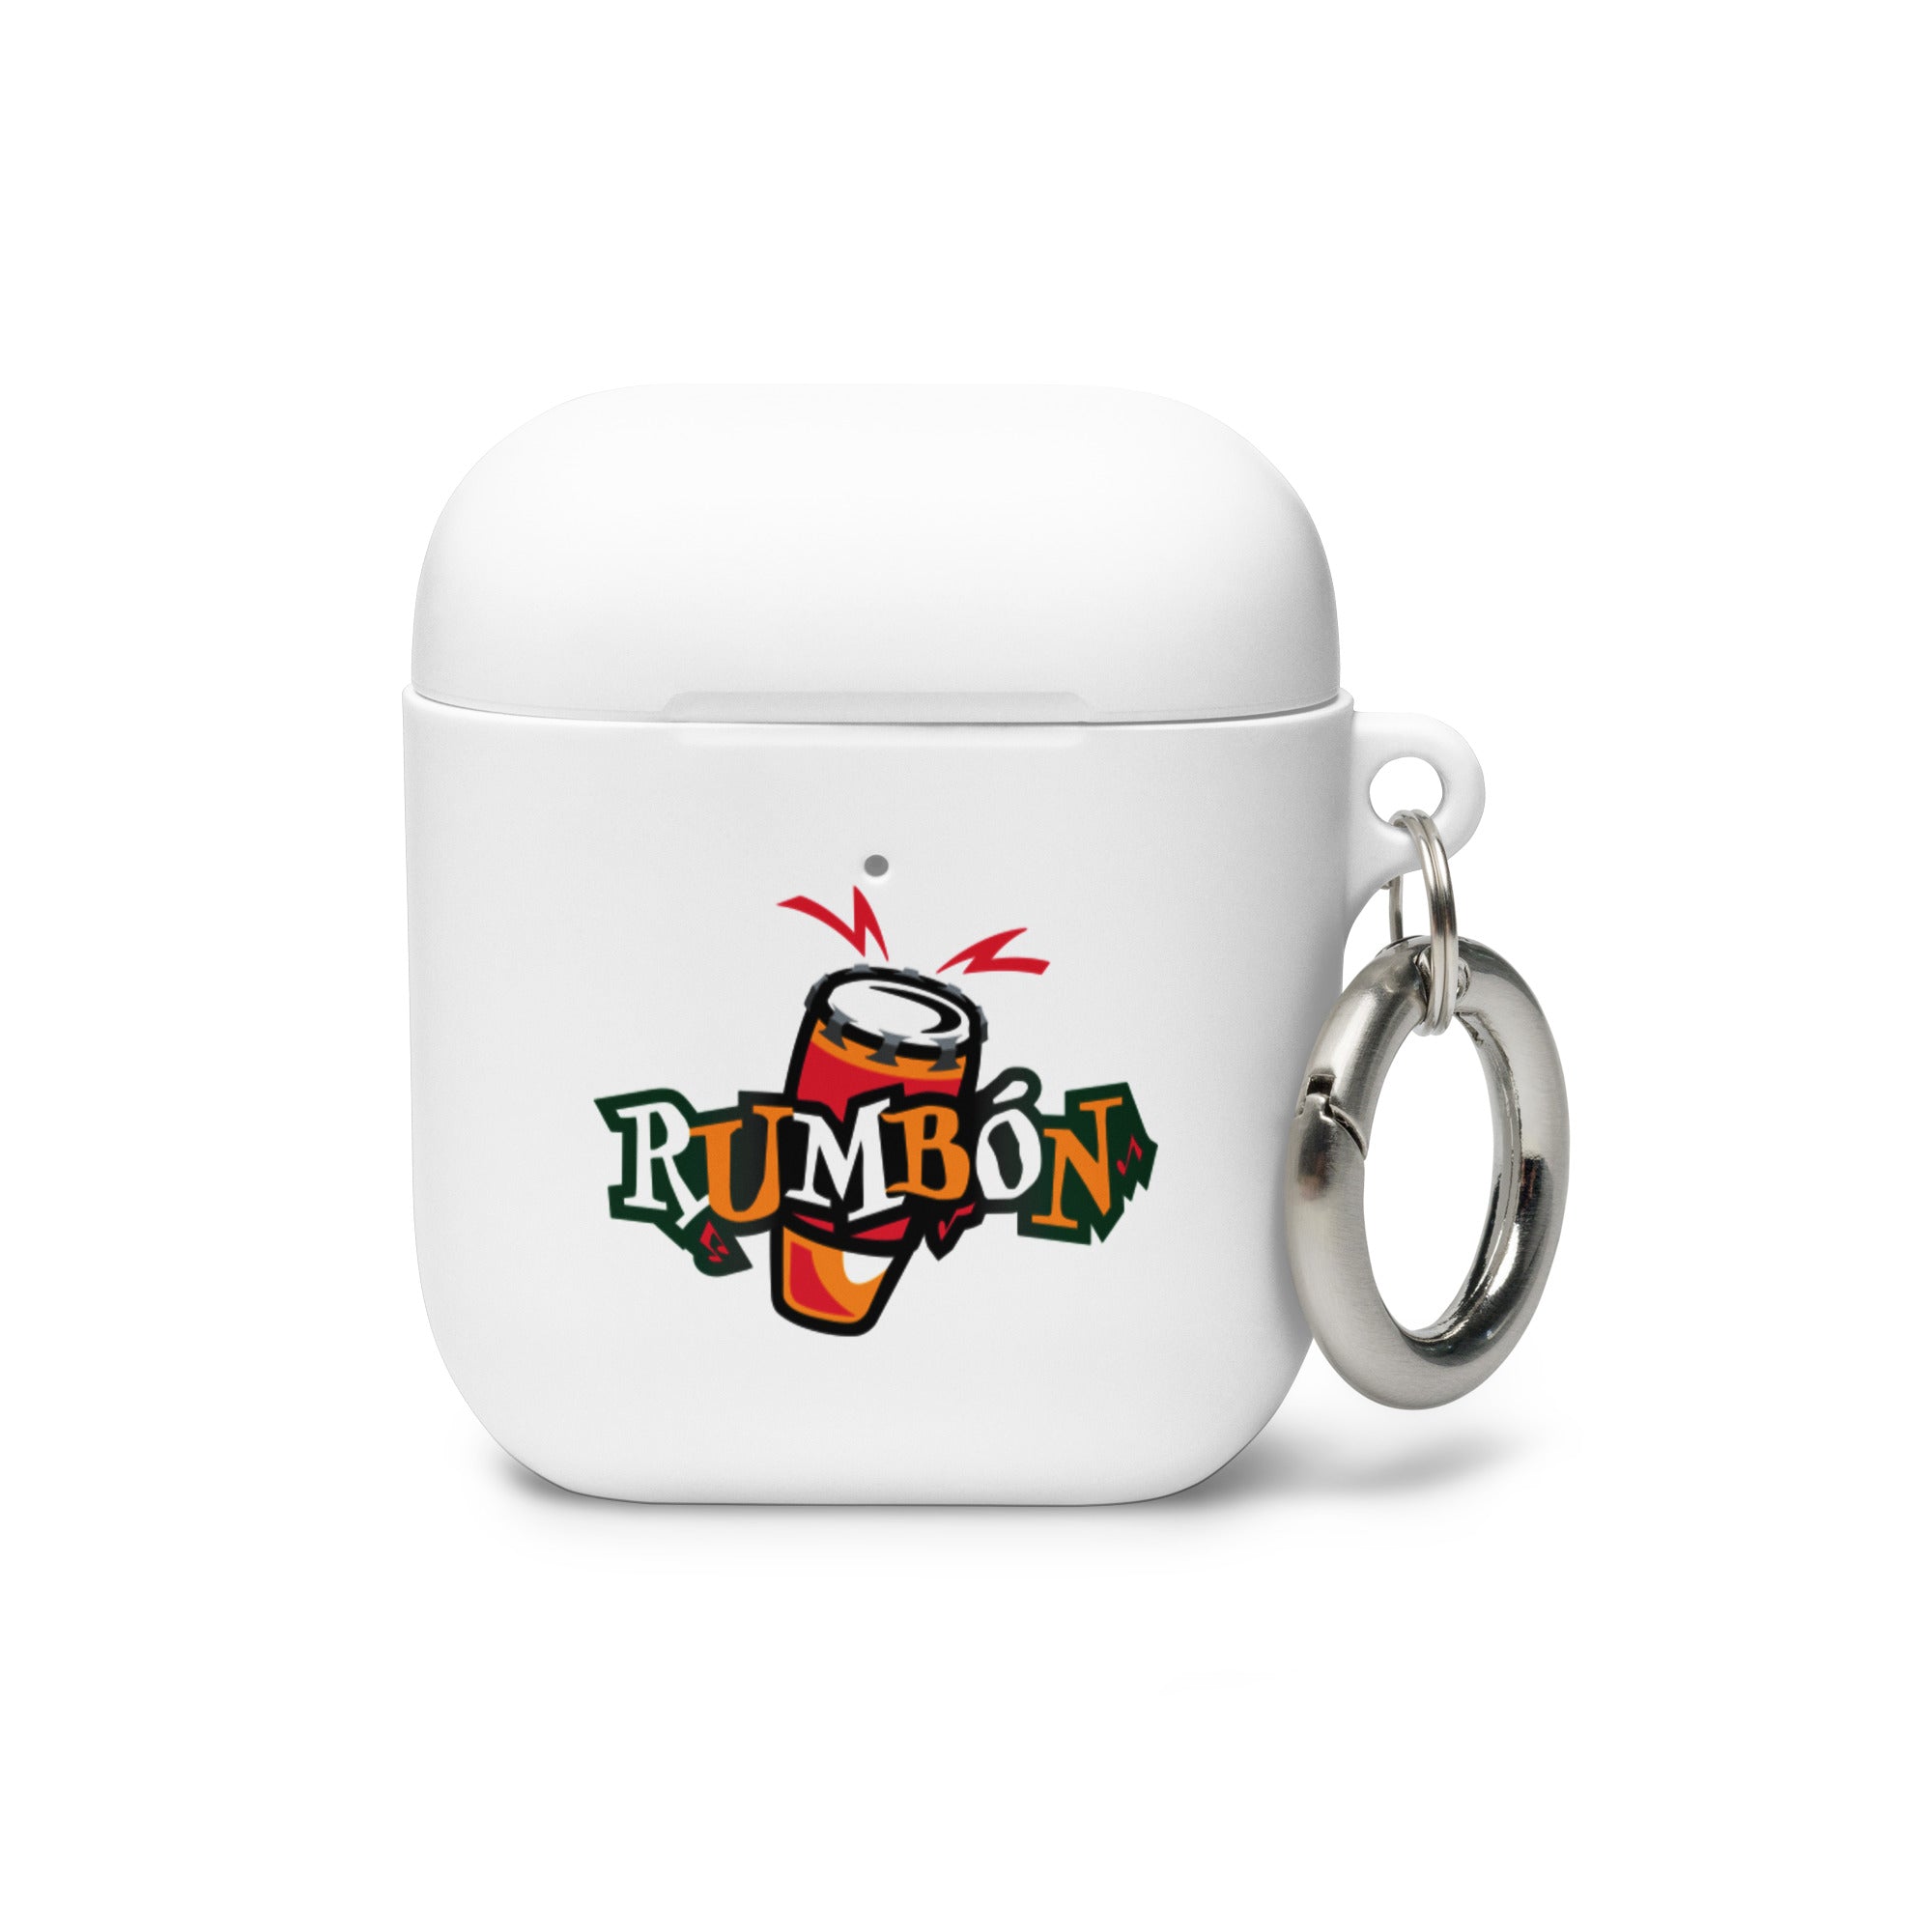 Rumbón: AirPods® Case Cover